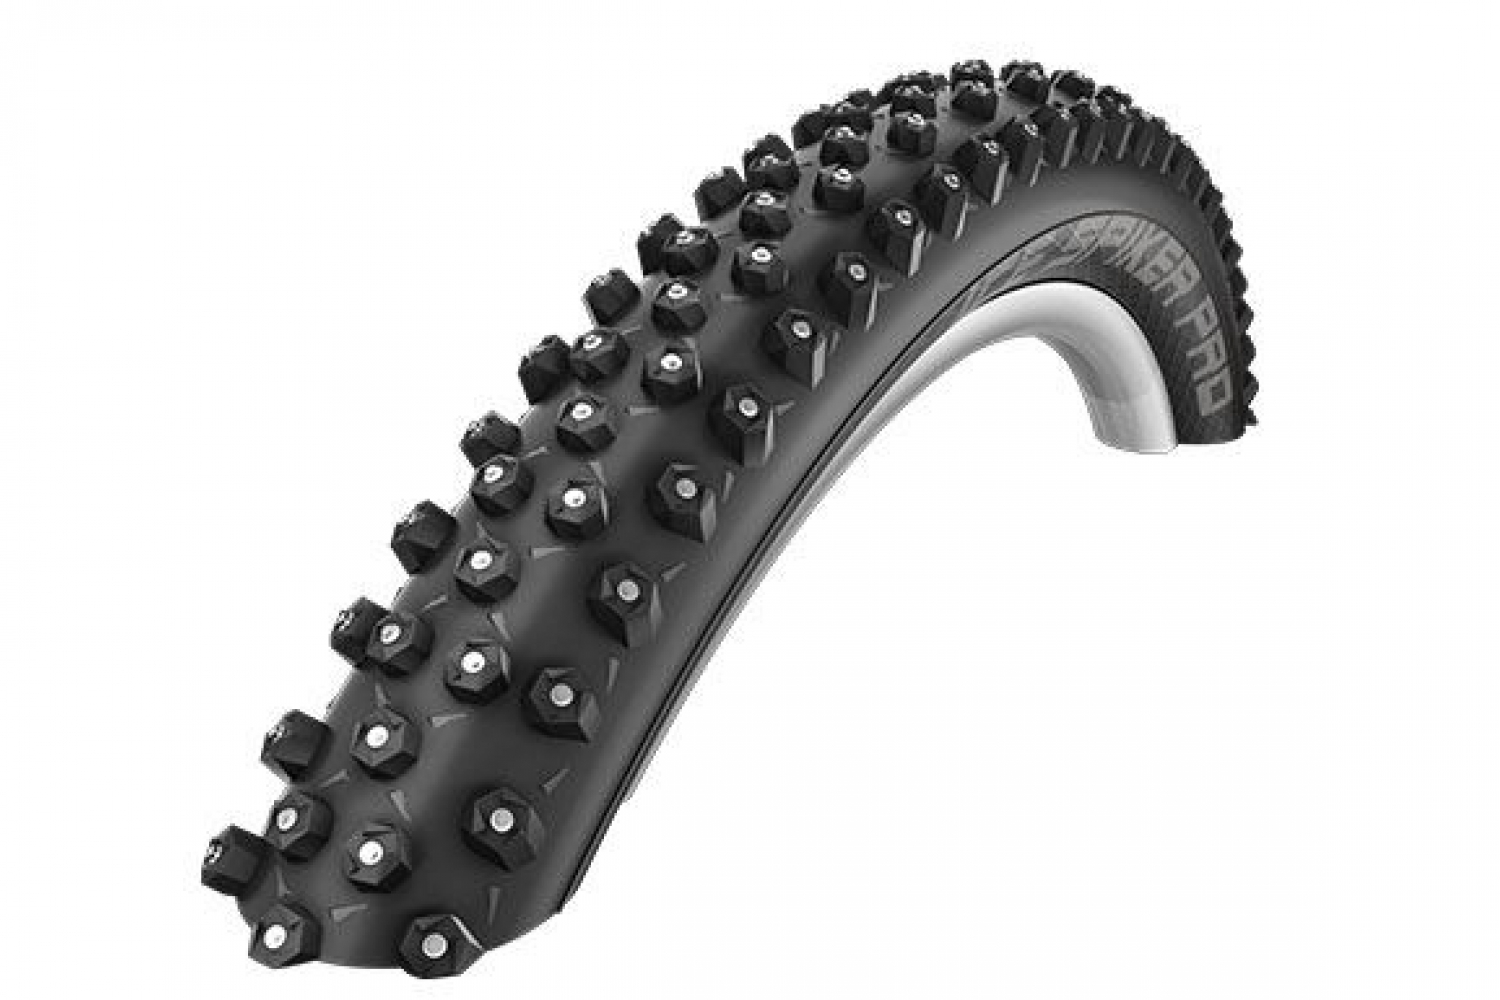 Hardtail mountain bikes with studded tires (with spikes) rental